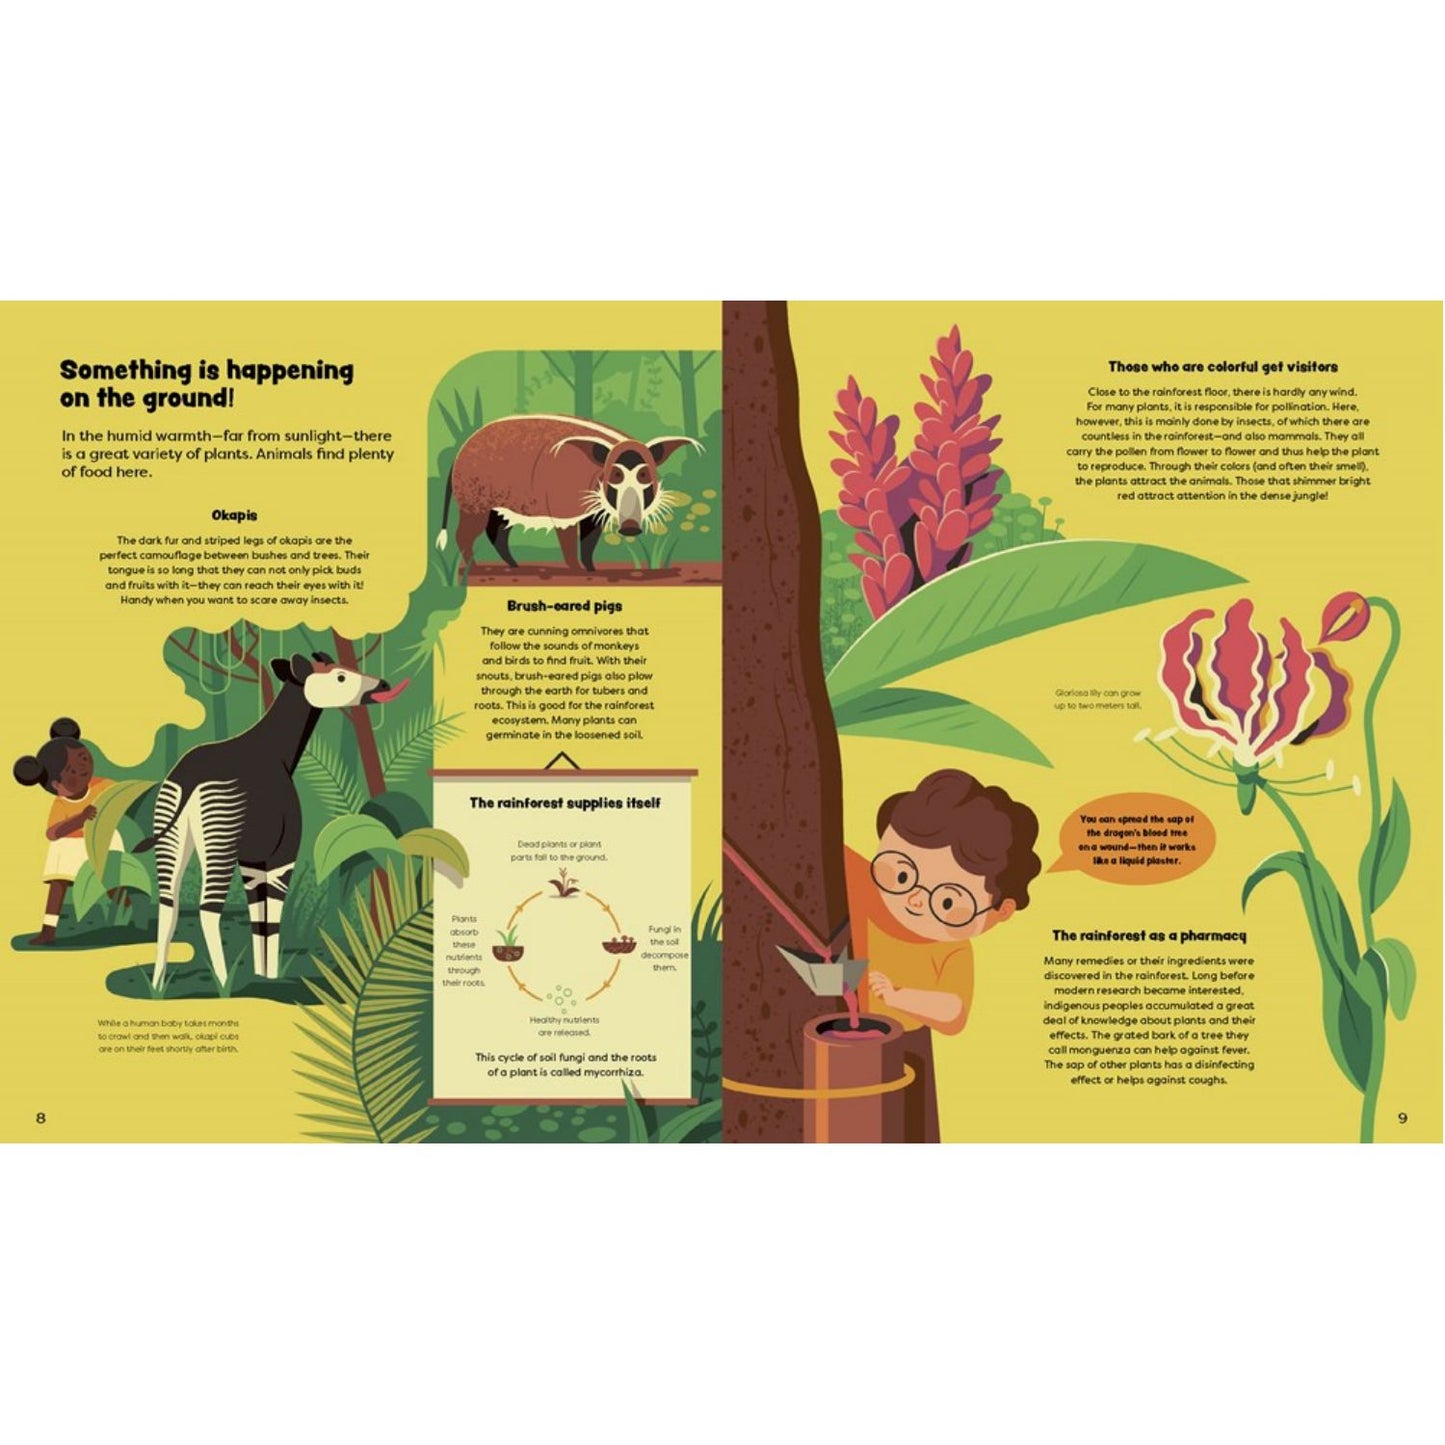 Explore the Rainforest: Emma and Louis in the Jungle | Children’s Book on Nature